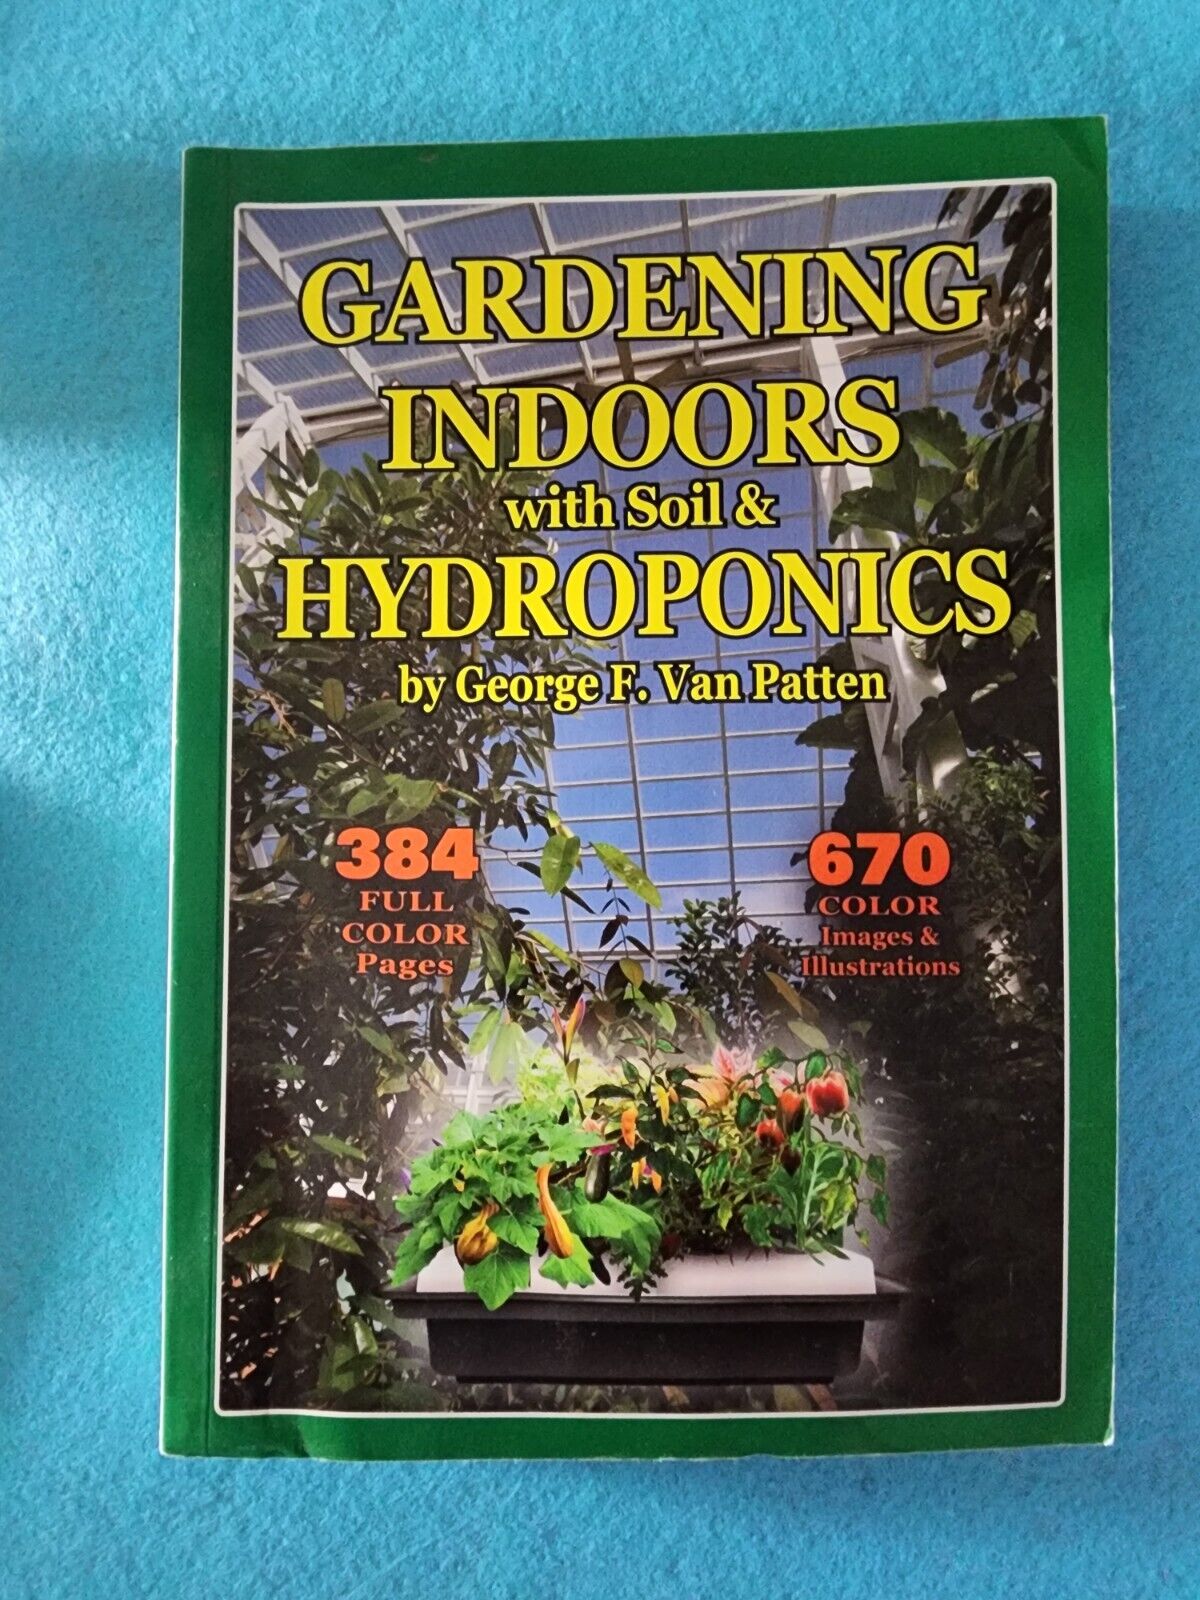 Gardening Indoors with Soil and Hydroponics by George F. Van Patten (2008, Trade